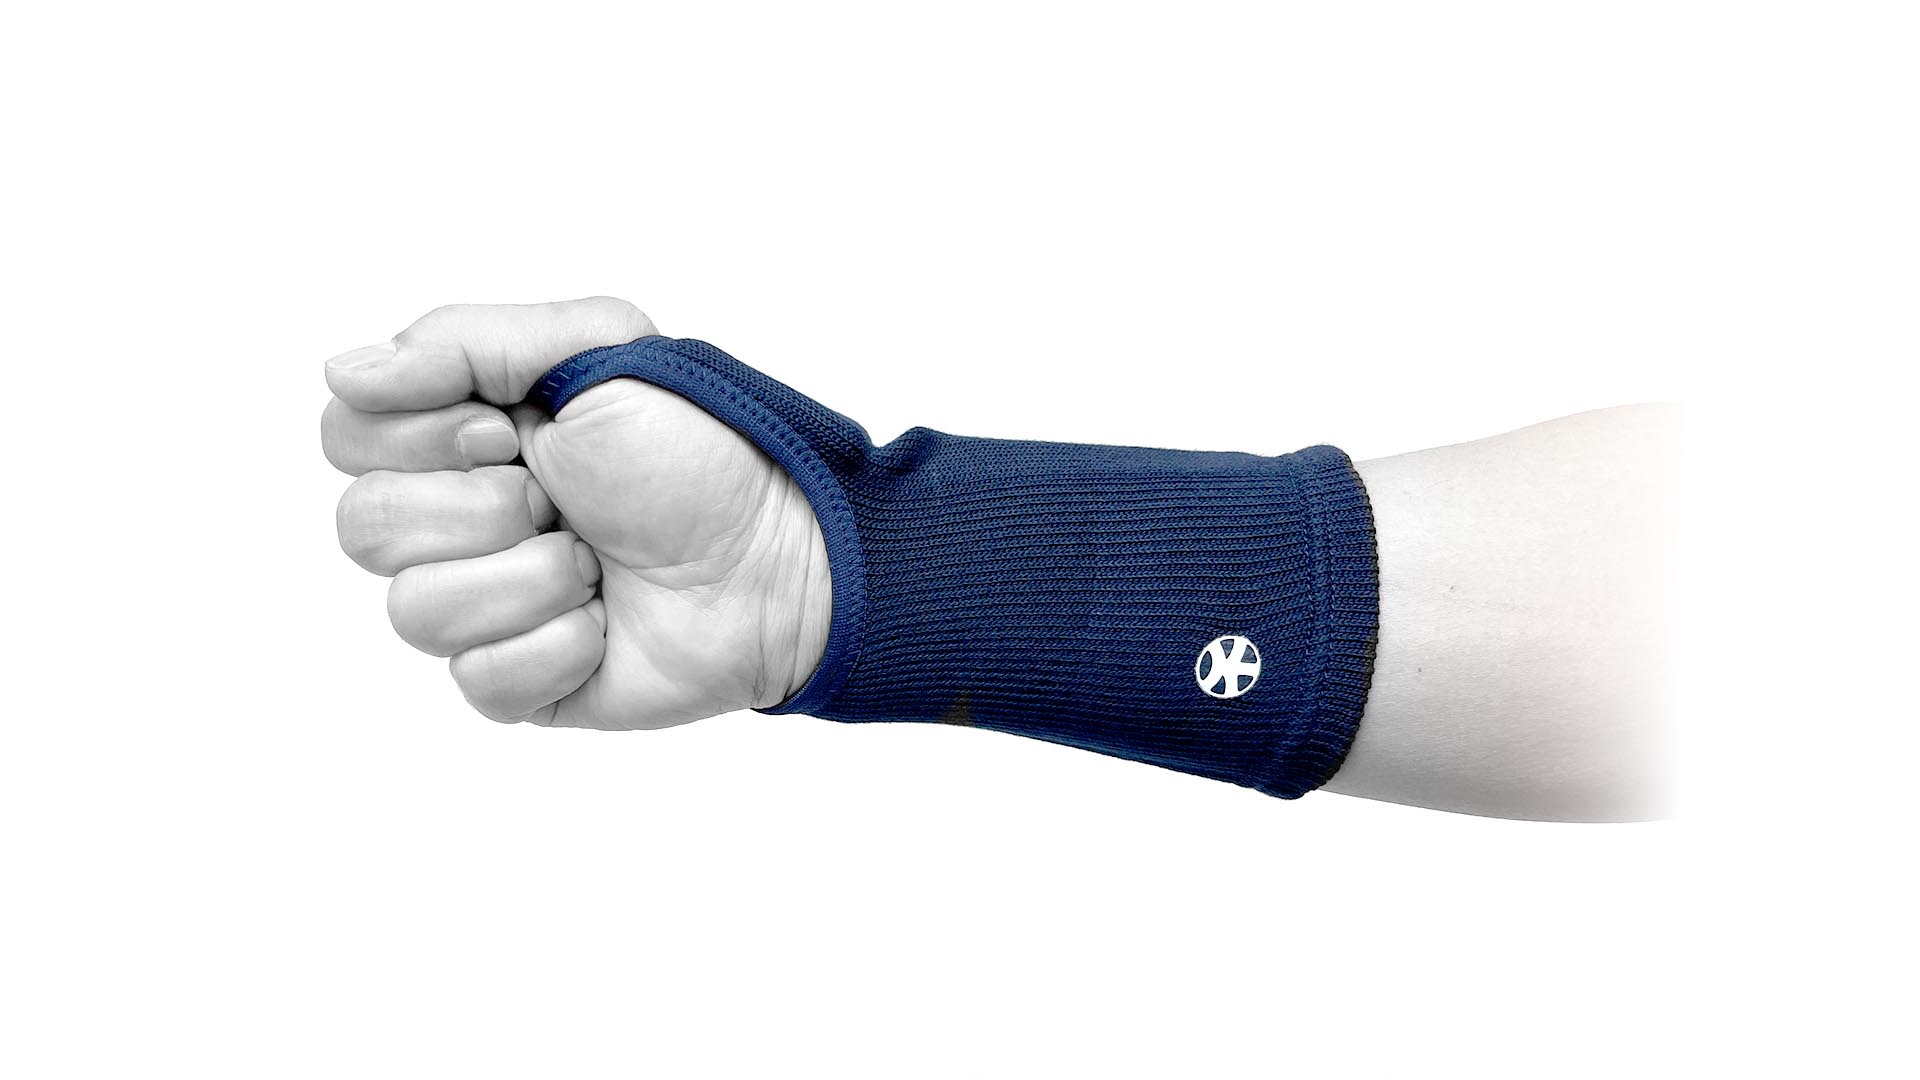 Kendo wrist and knuckle protector